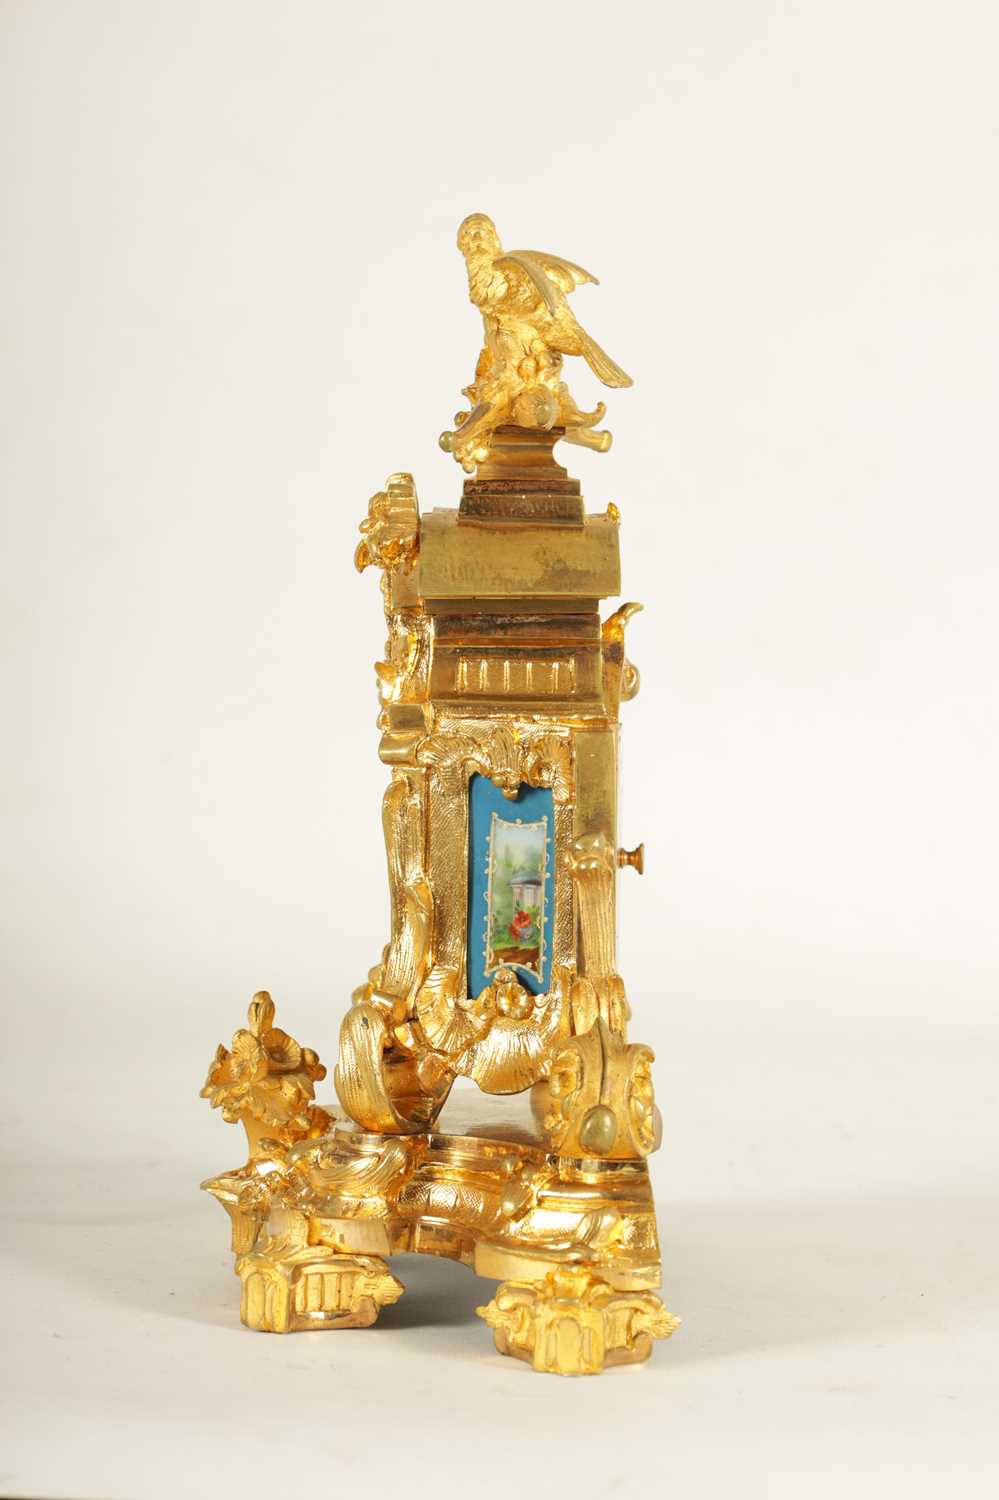 A SMALL LATE 19TH CENTURY FRENCH PORCELAIN PANELLED ORMOLU CARRIAGE STYLE MANTEL CLOCK - Image 3 of 13